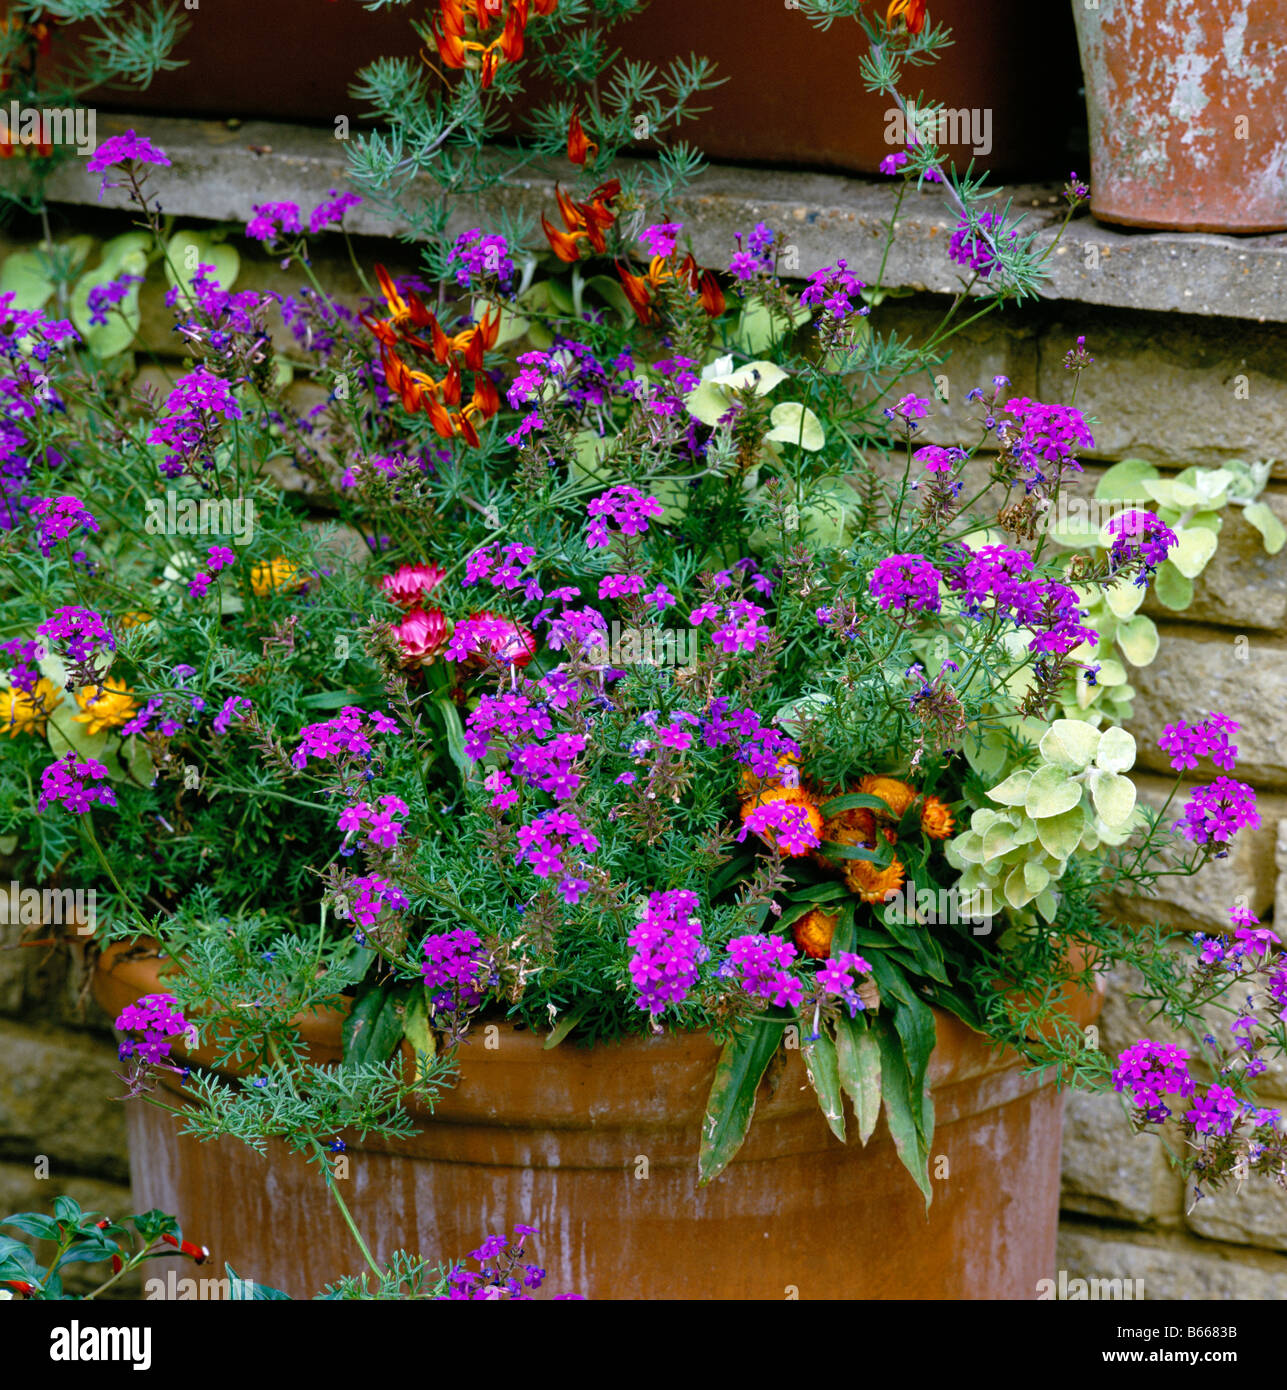 Planted Terracotta Container with summer flowers Stock Photo